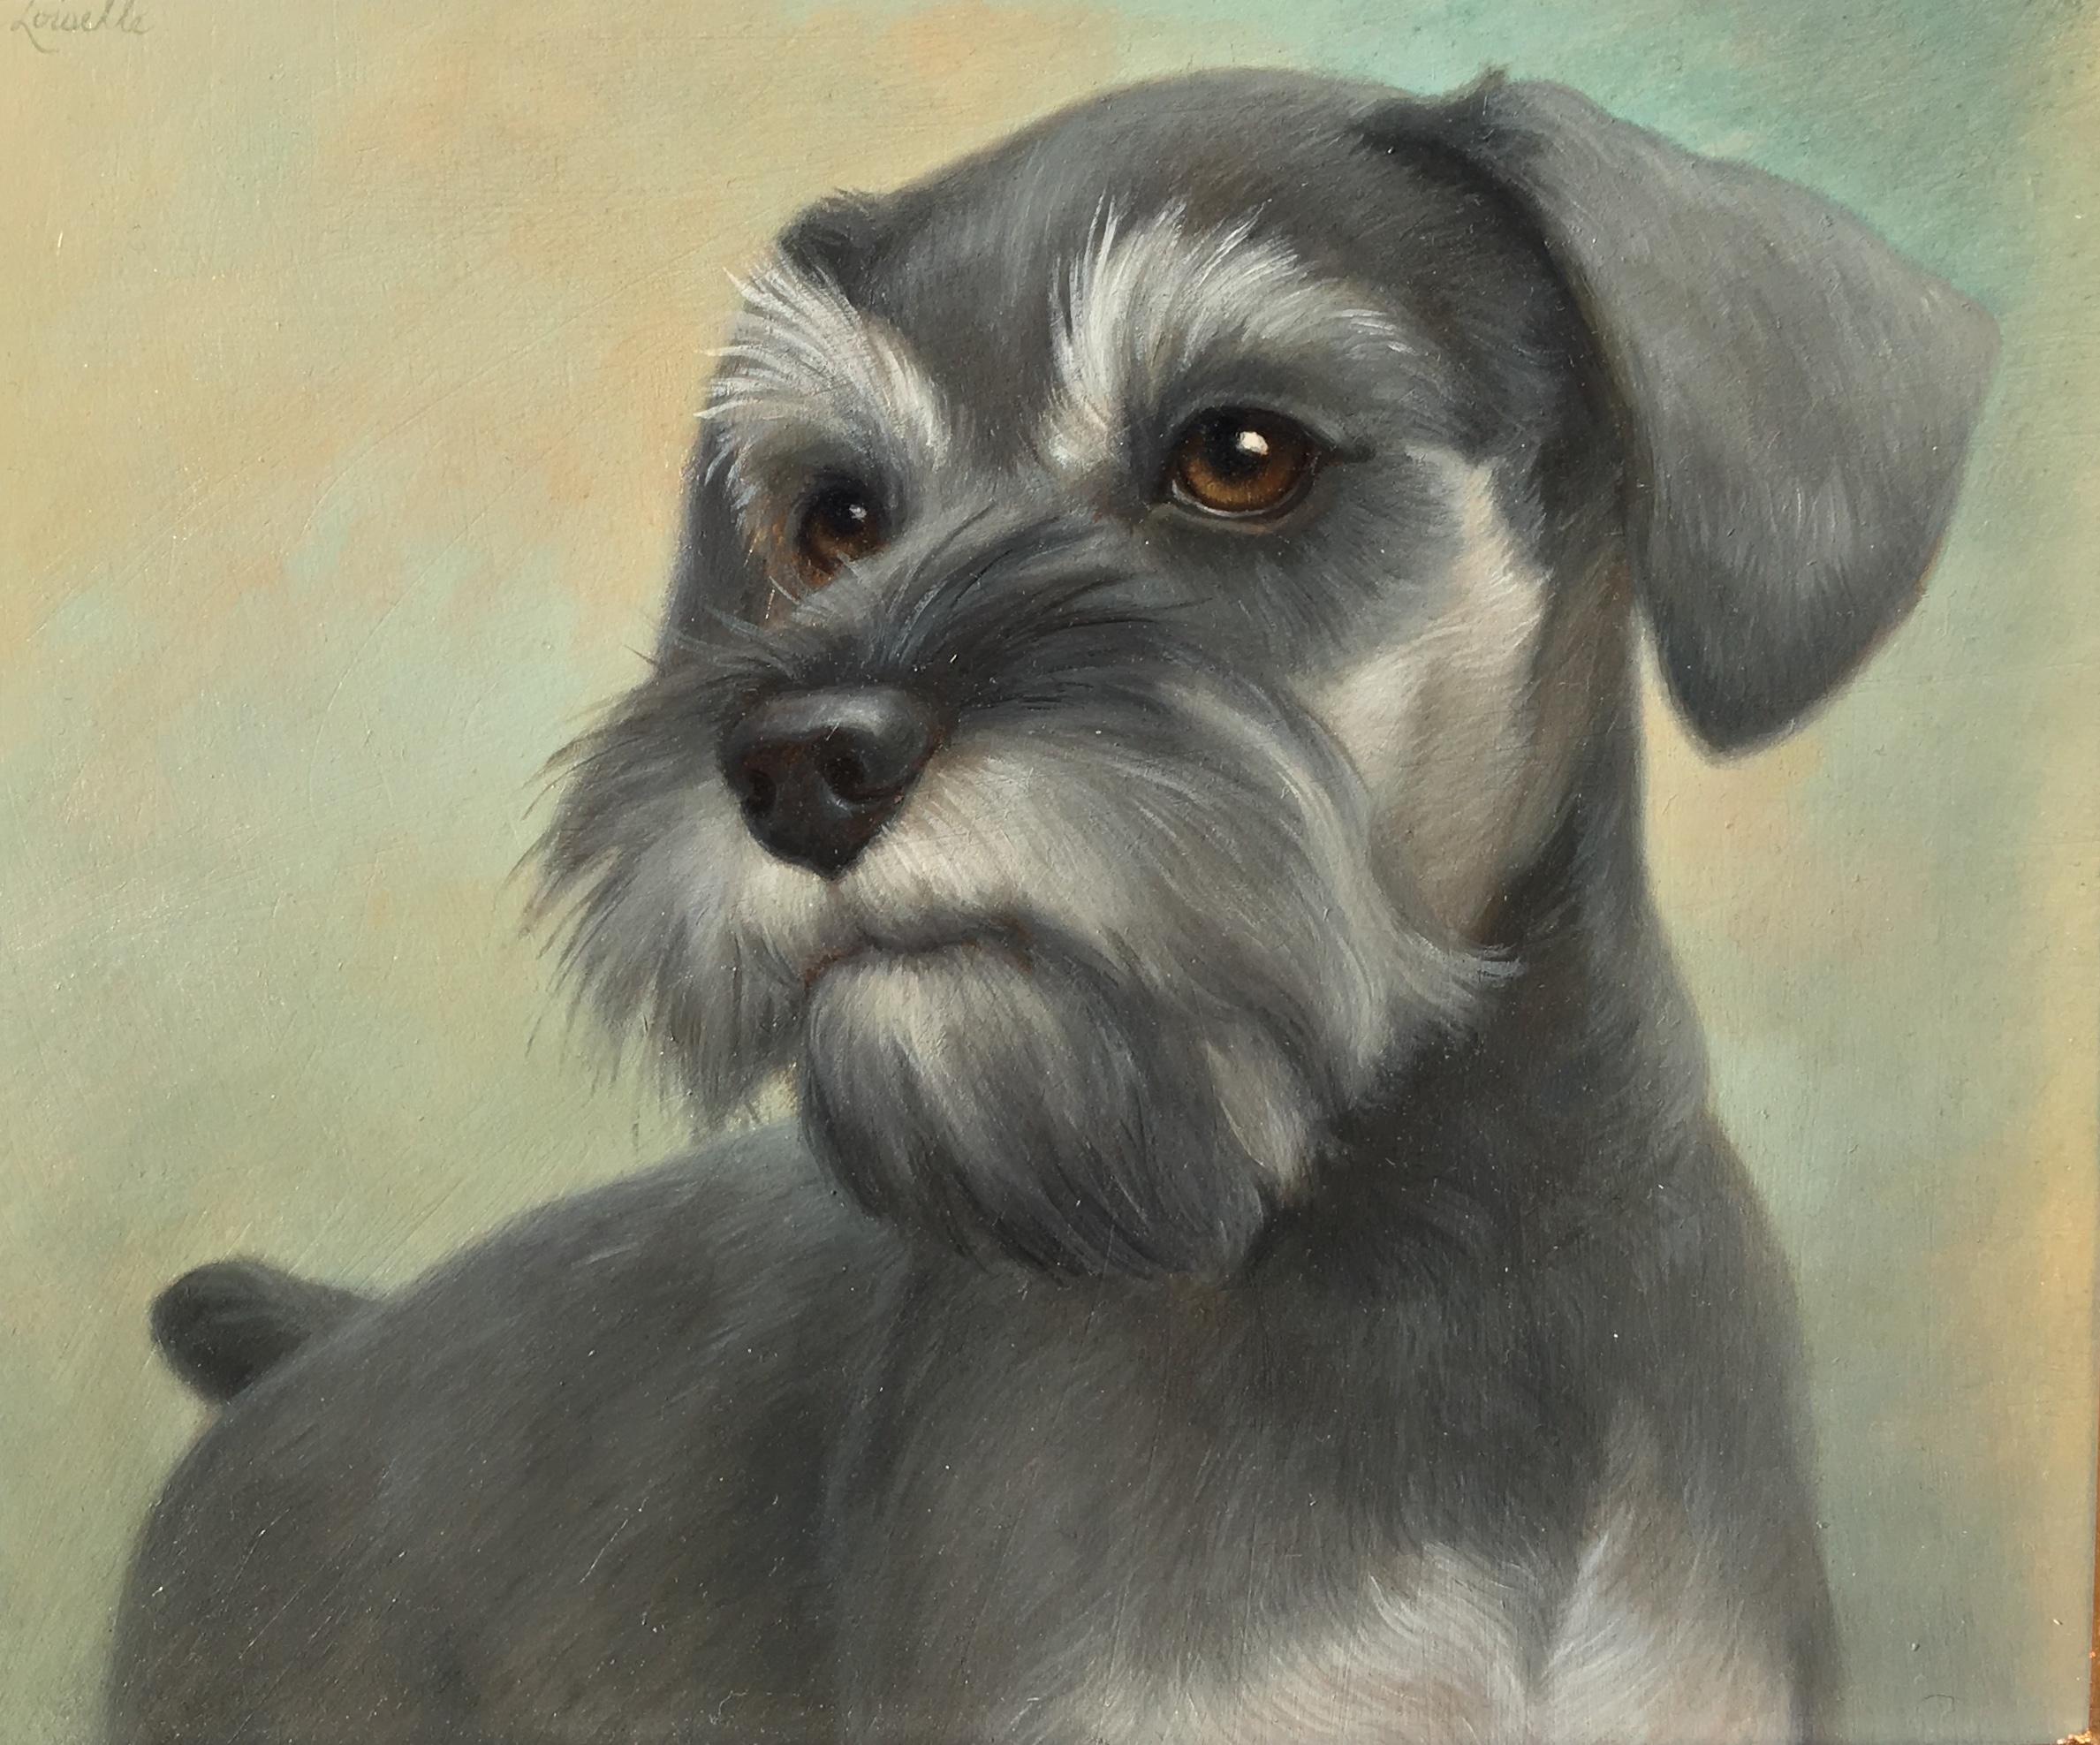 Beth de Loiselle Portrait Painting - Realistic detailed oil of a romantic Schnauzer dog painting in a frame